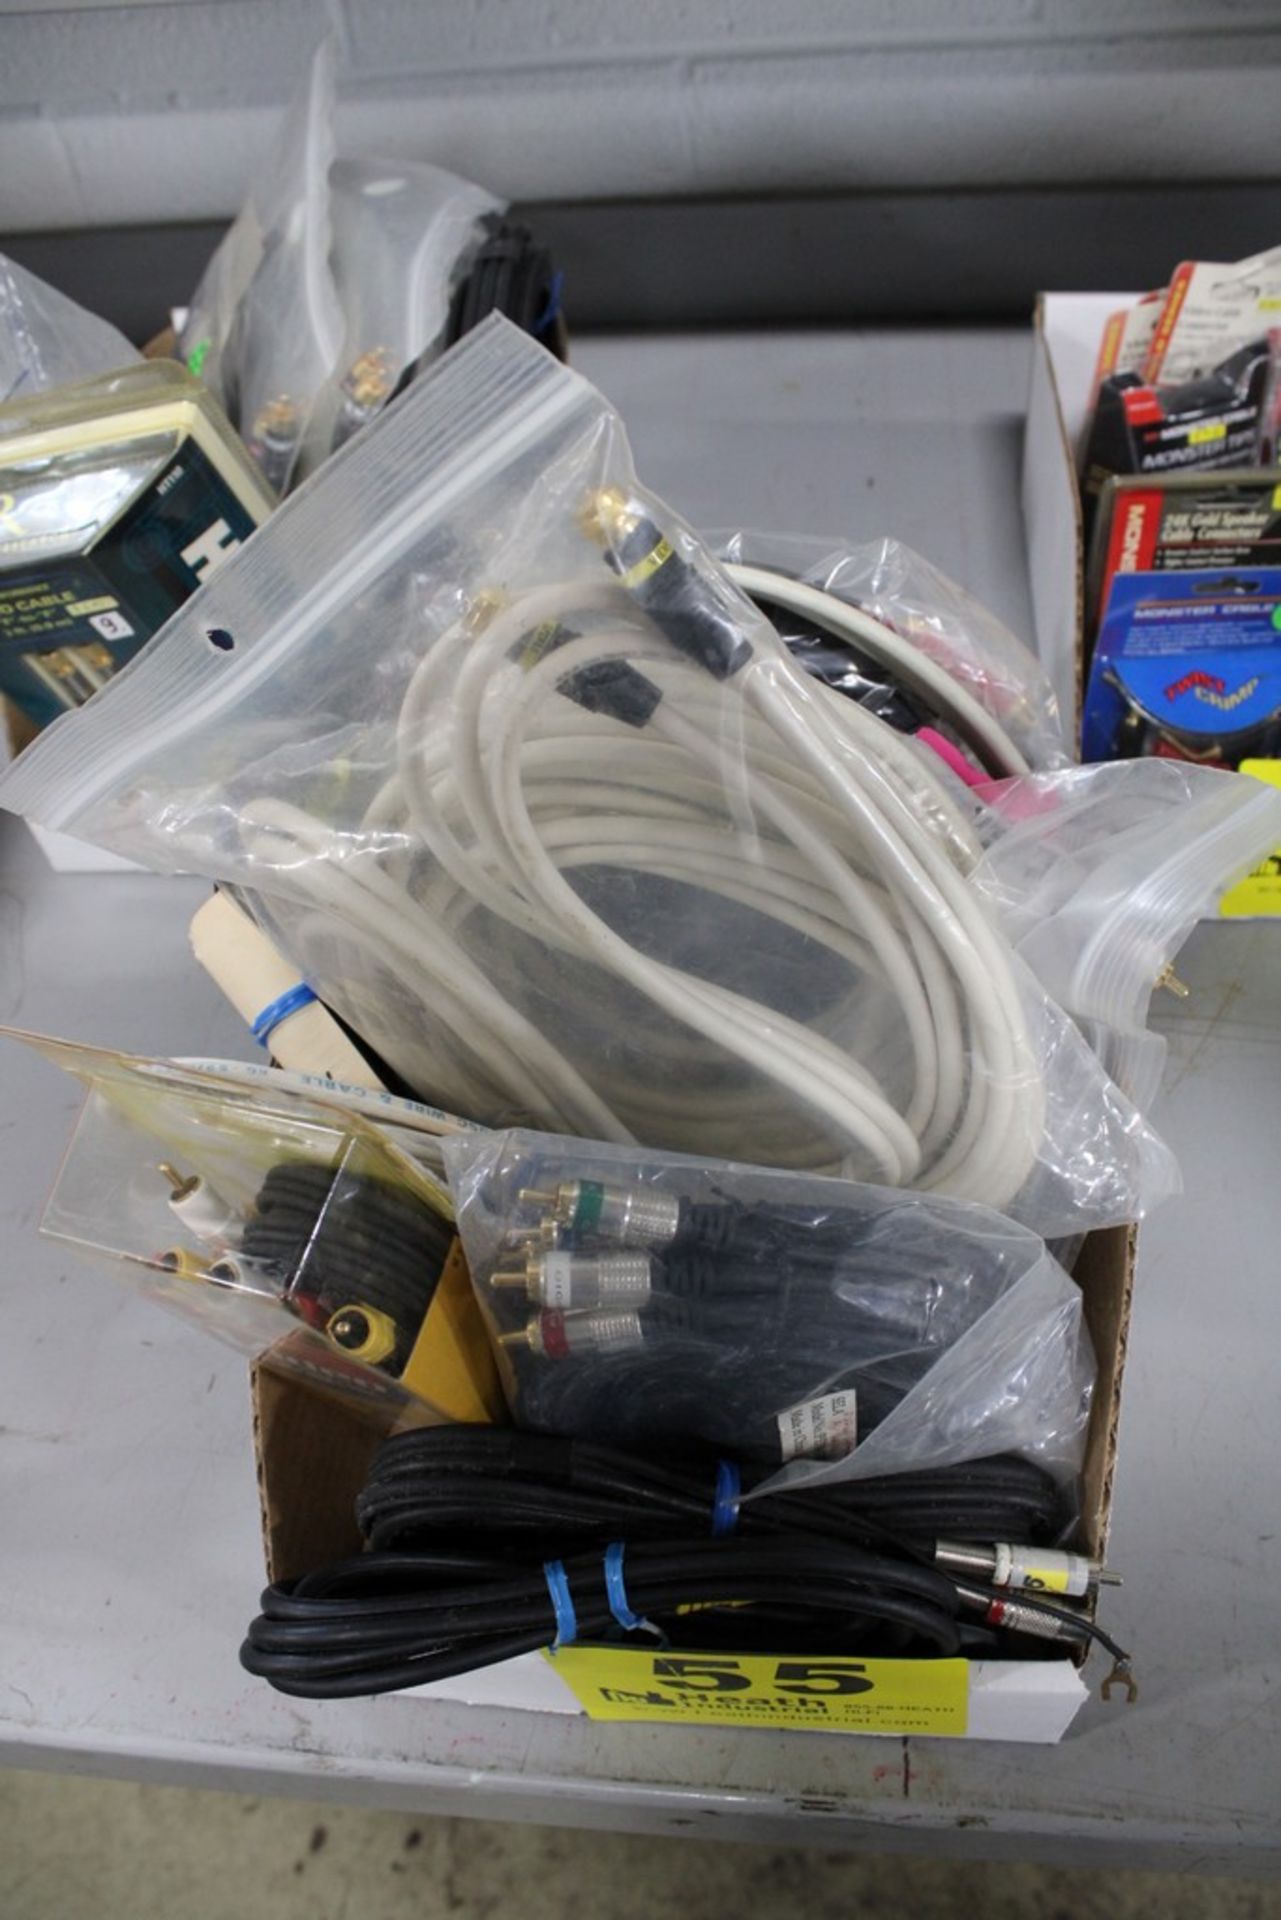 ASSORTED AUDIO/VIDEO CABLES IN BOX